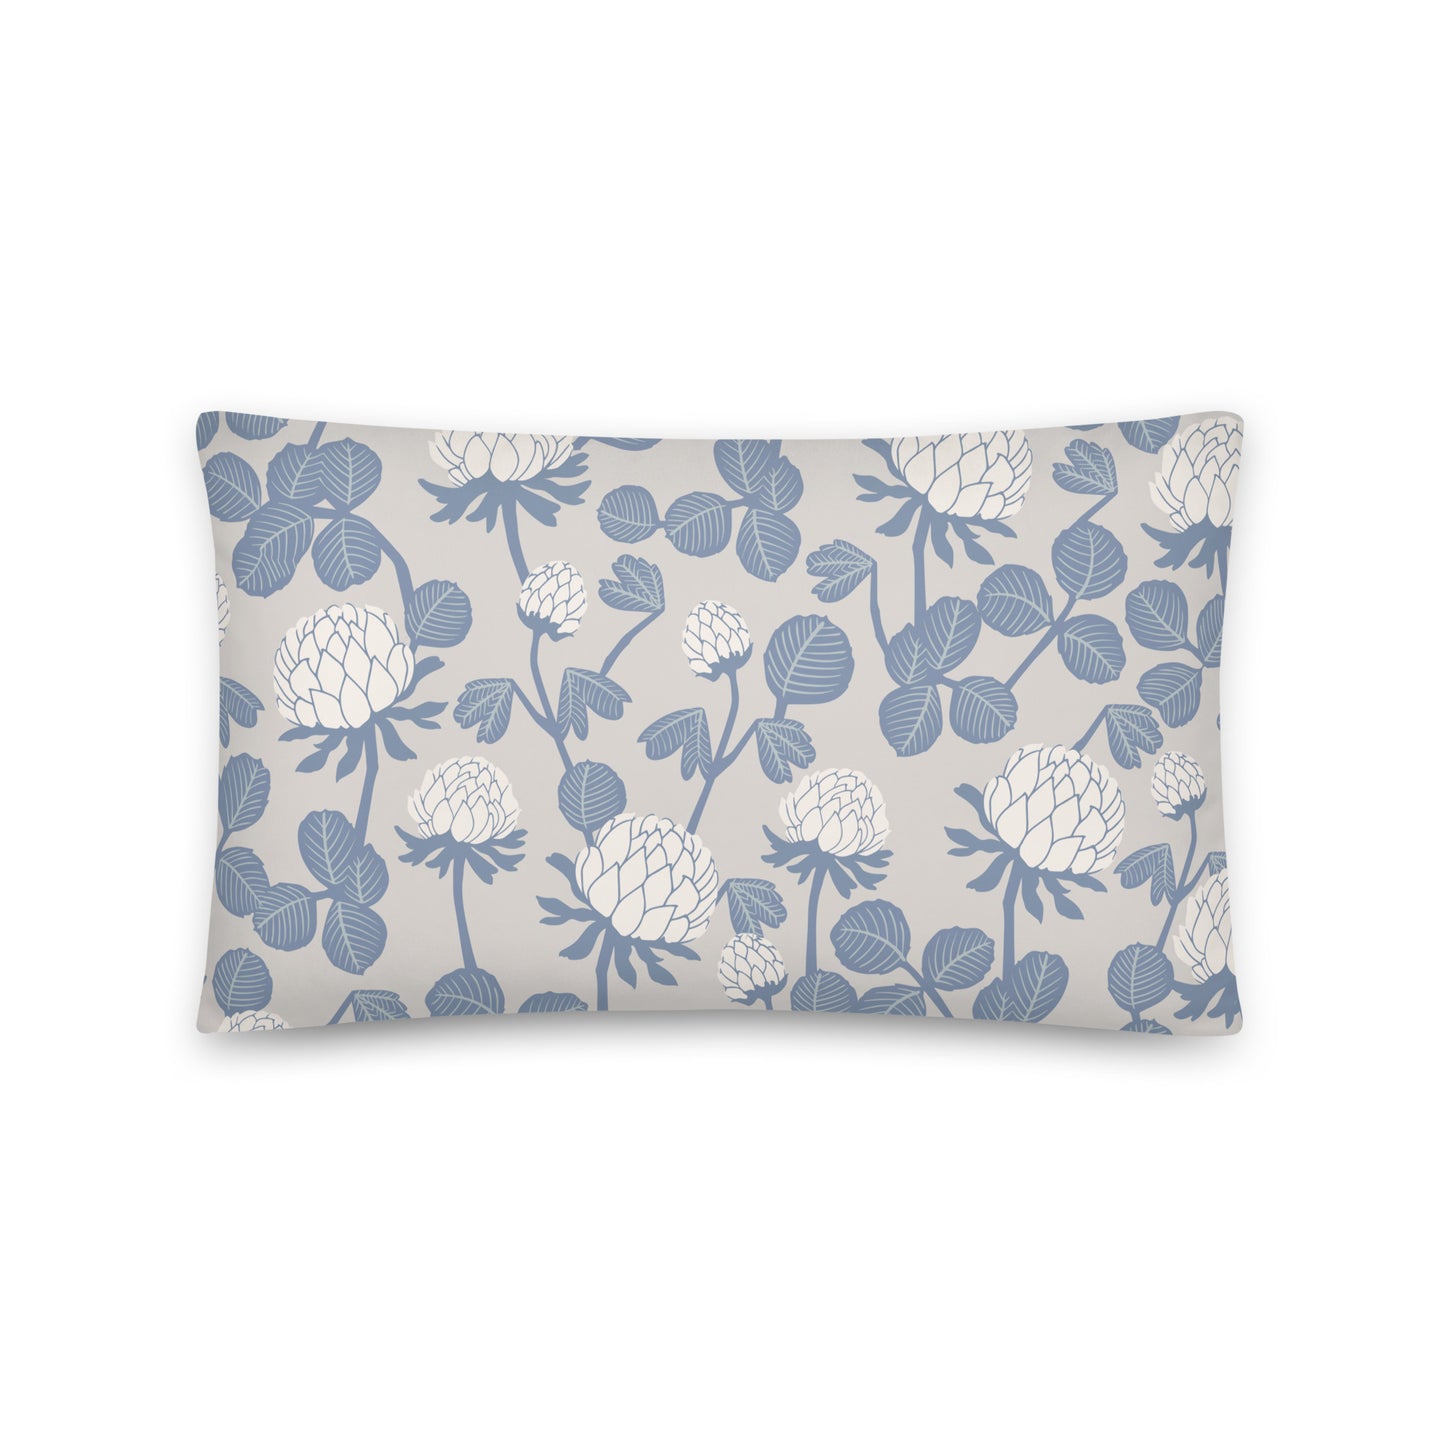 Grey Floral - Sustainably Made Pillows